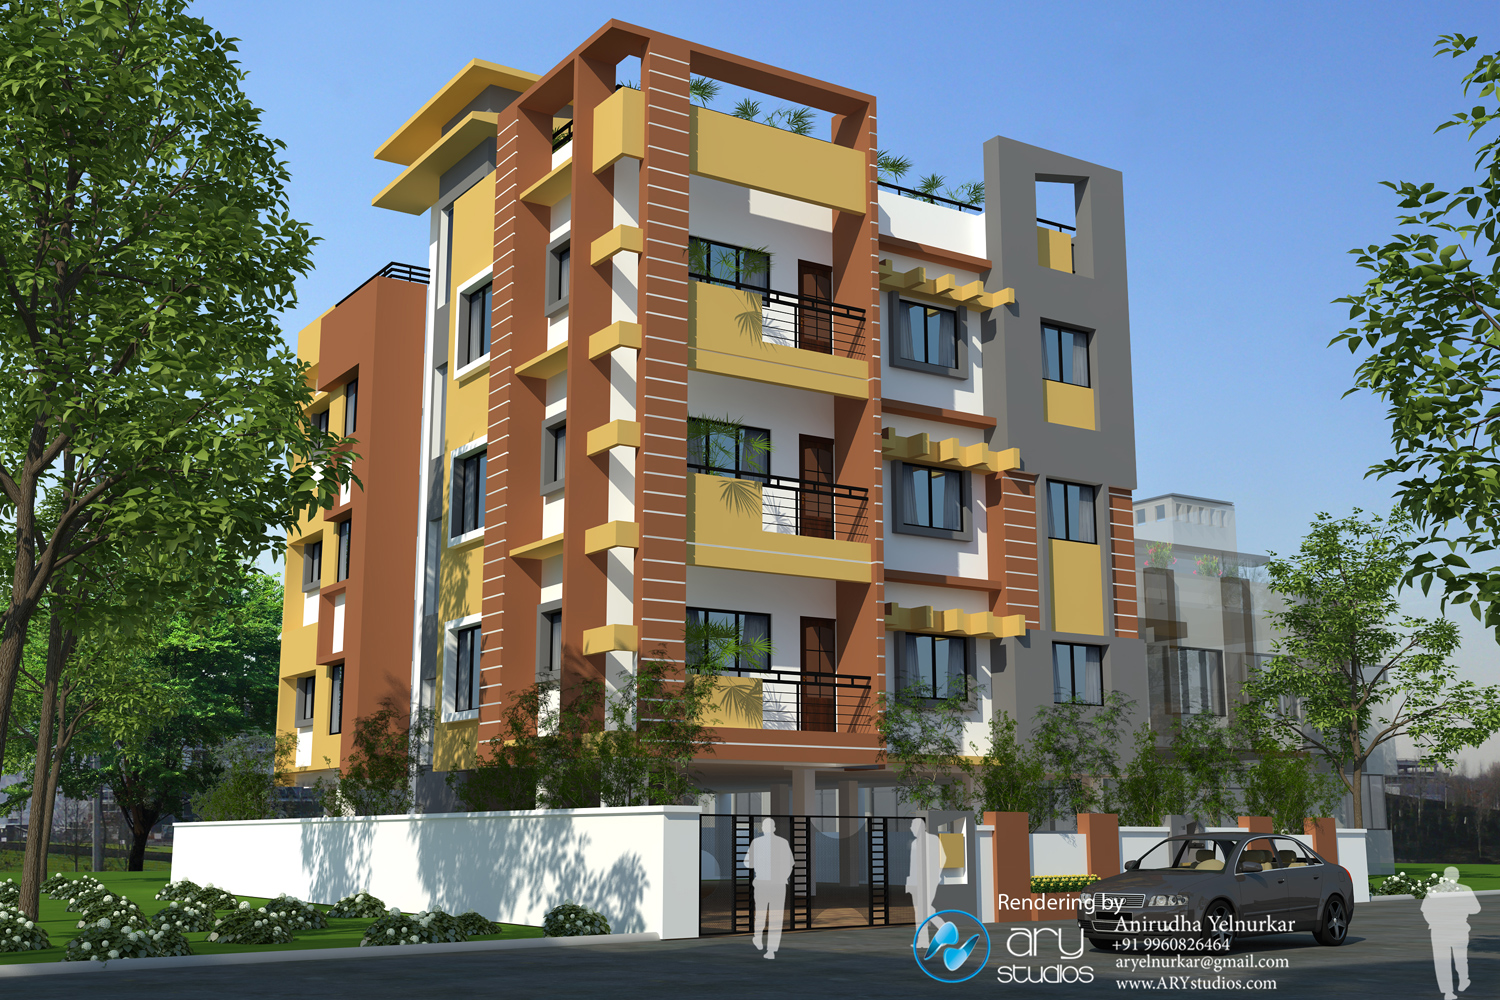 Exterior_architectural_rendering_building_design_3d_elevations_compound_wall_window_rendering